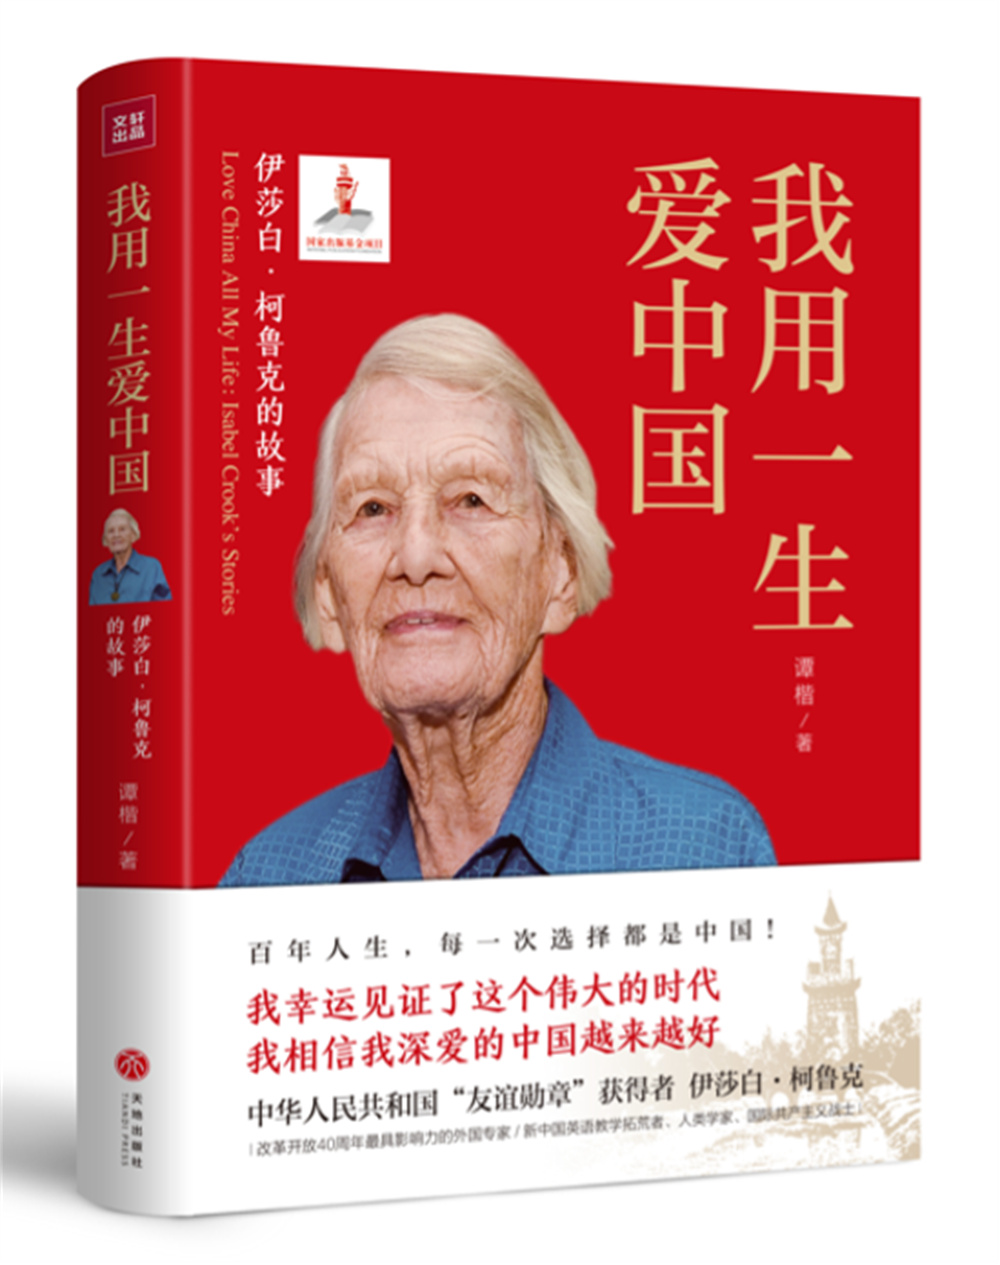 Book Cover of "I Love China With My Life: The Story of Isabelle Crook"